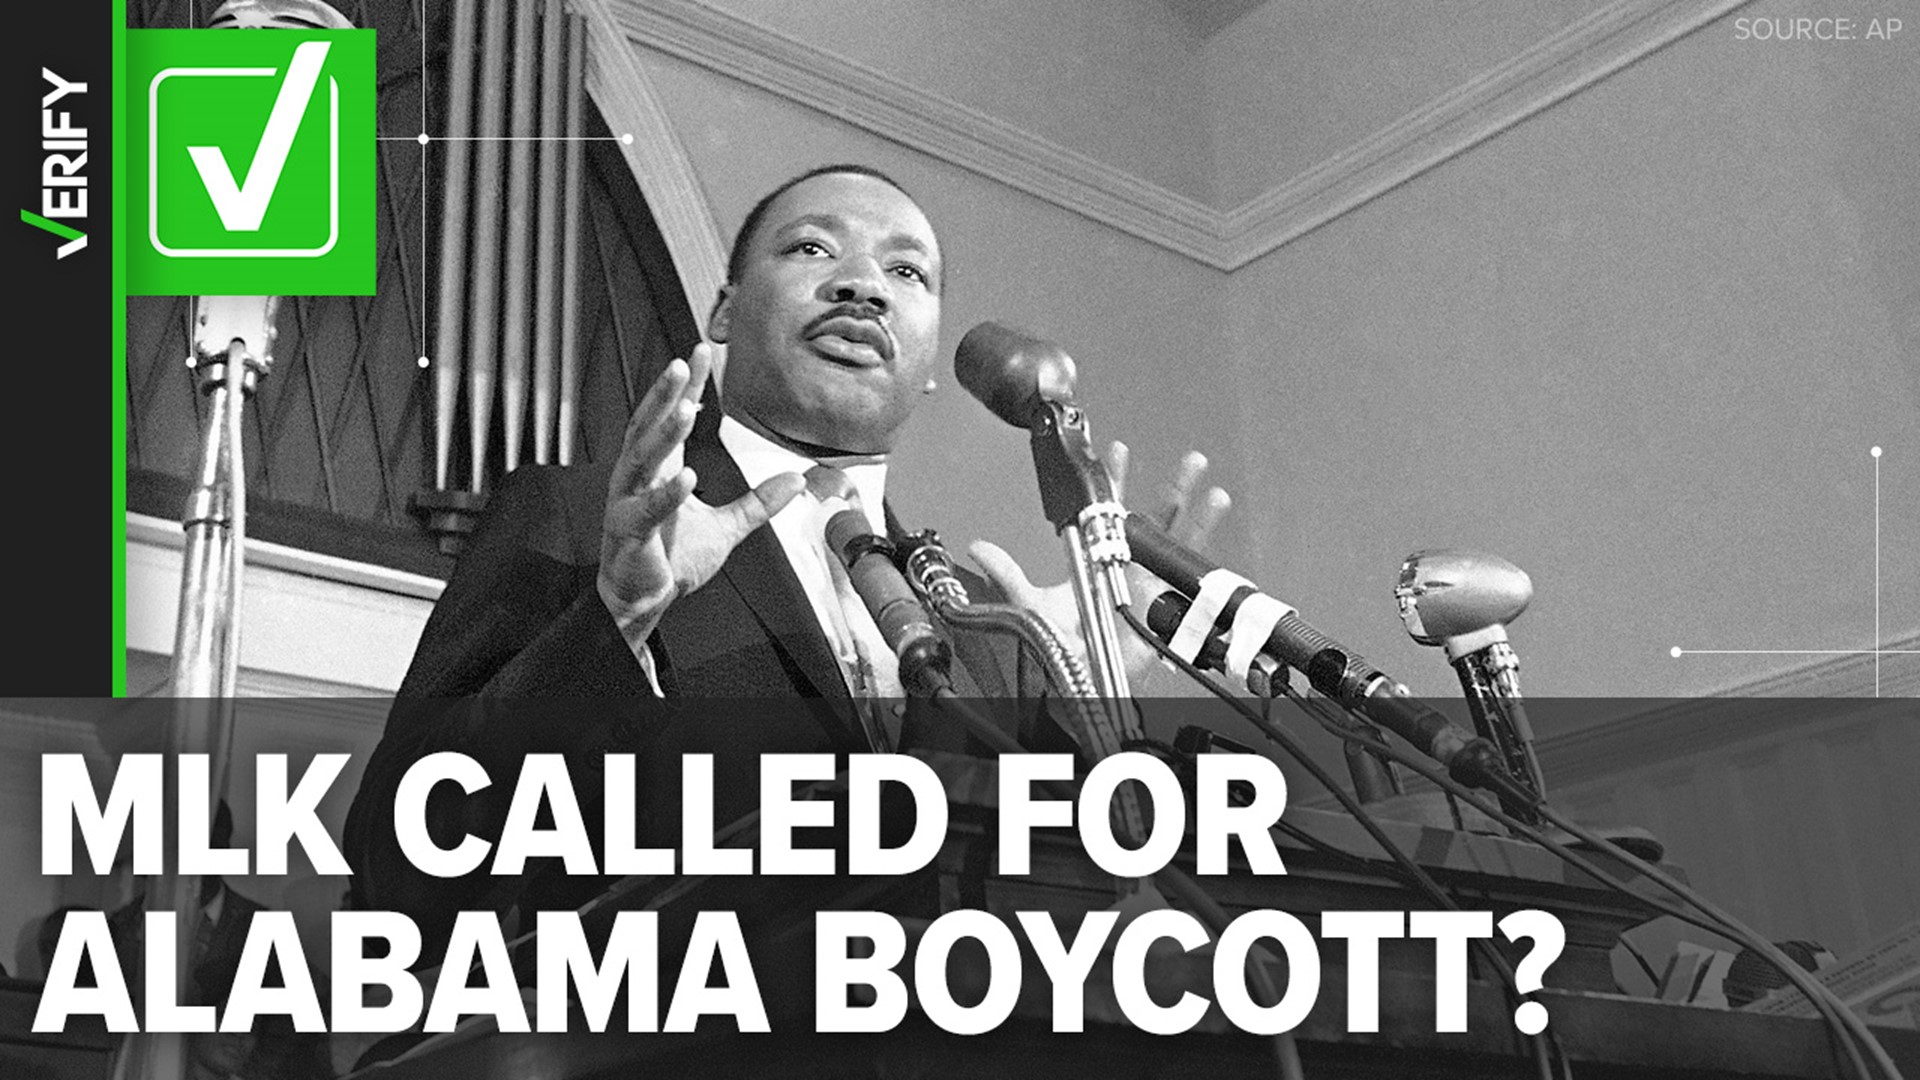 After the NAACP issued a travel advisory for Florida, Sen. Ted Cruz said MLK would be “ashamed.” But King organized a similar boycott in 1965.